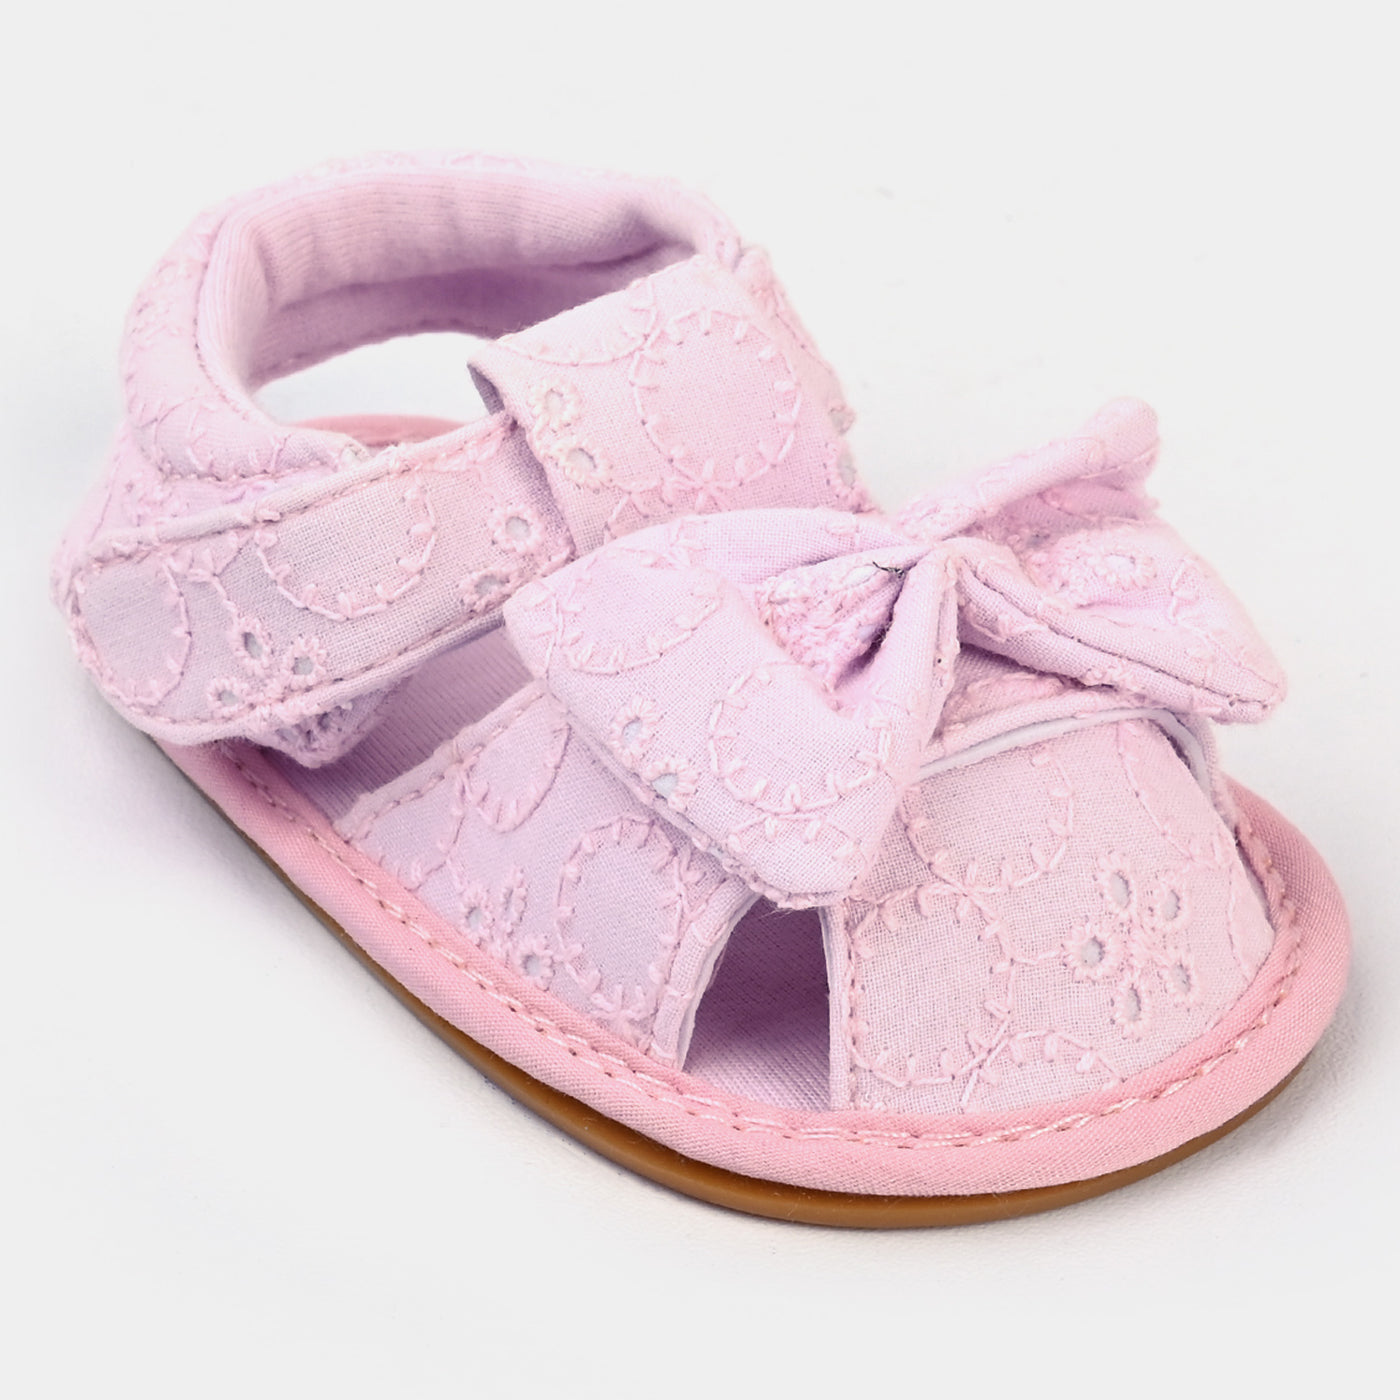 Baby Girls Shoes C-793-Pink